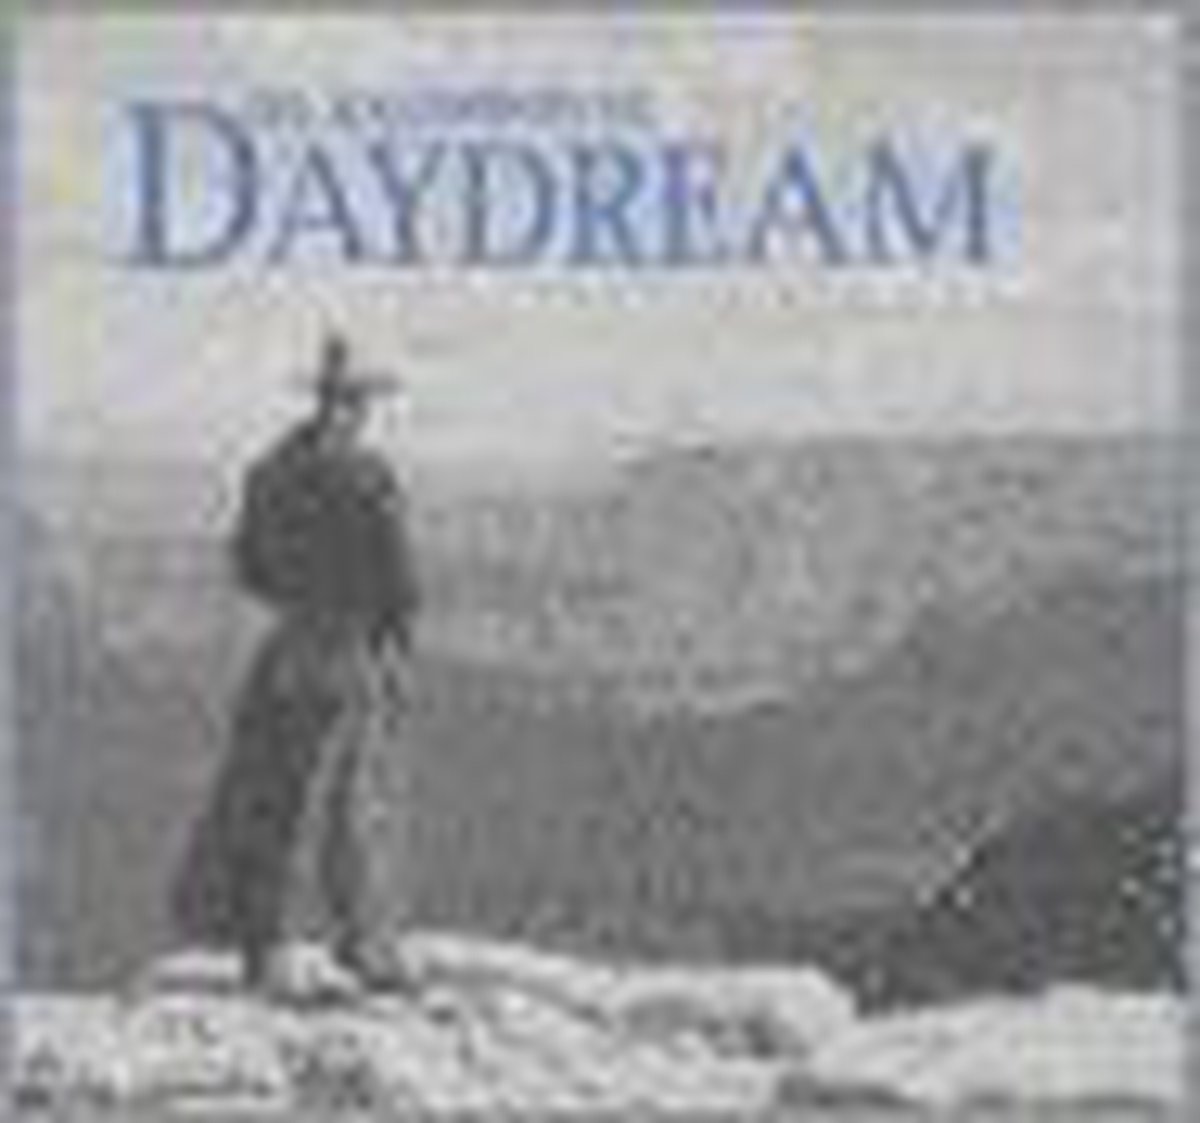 An Invitation to Daydream